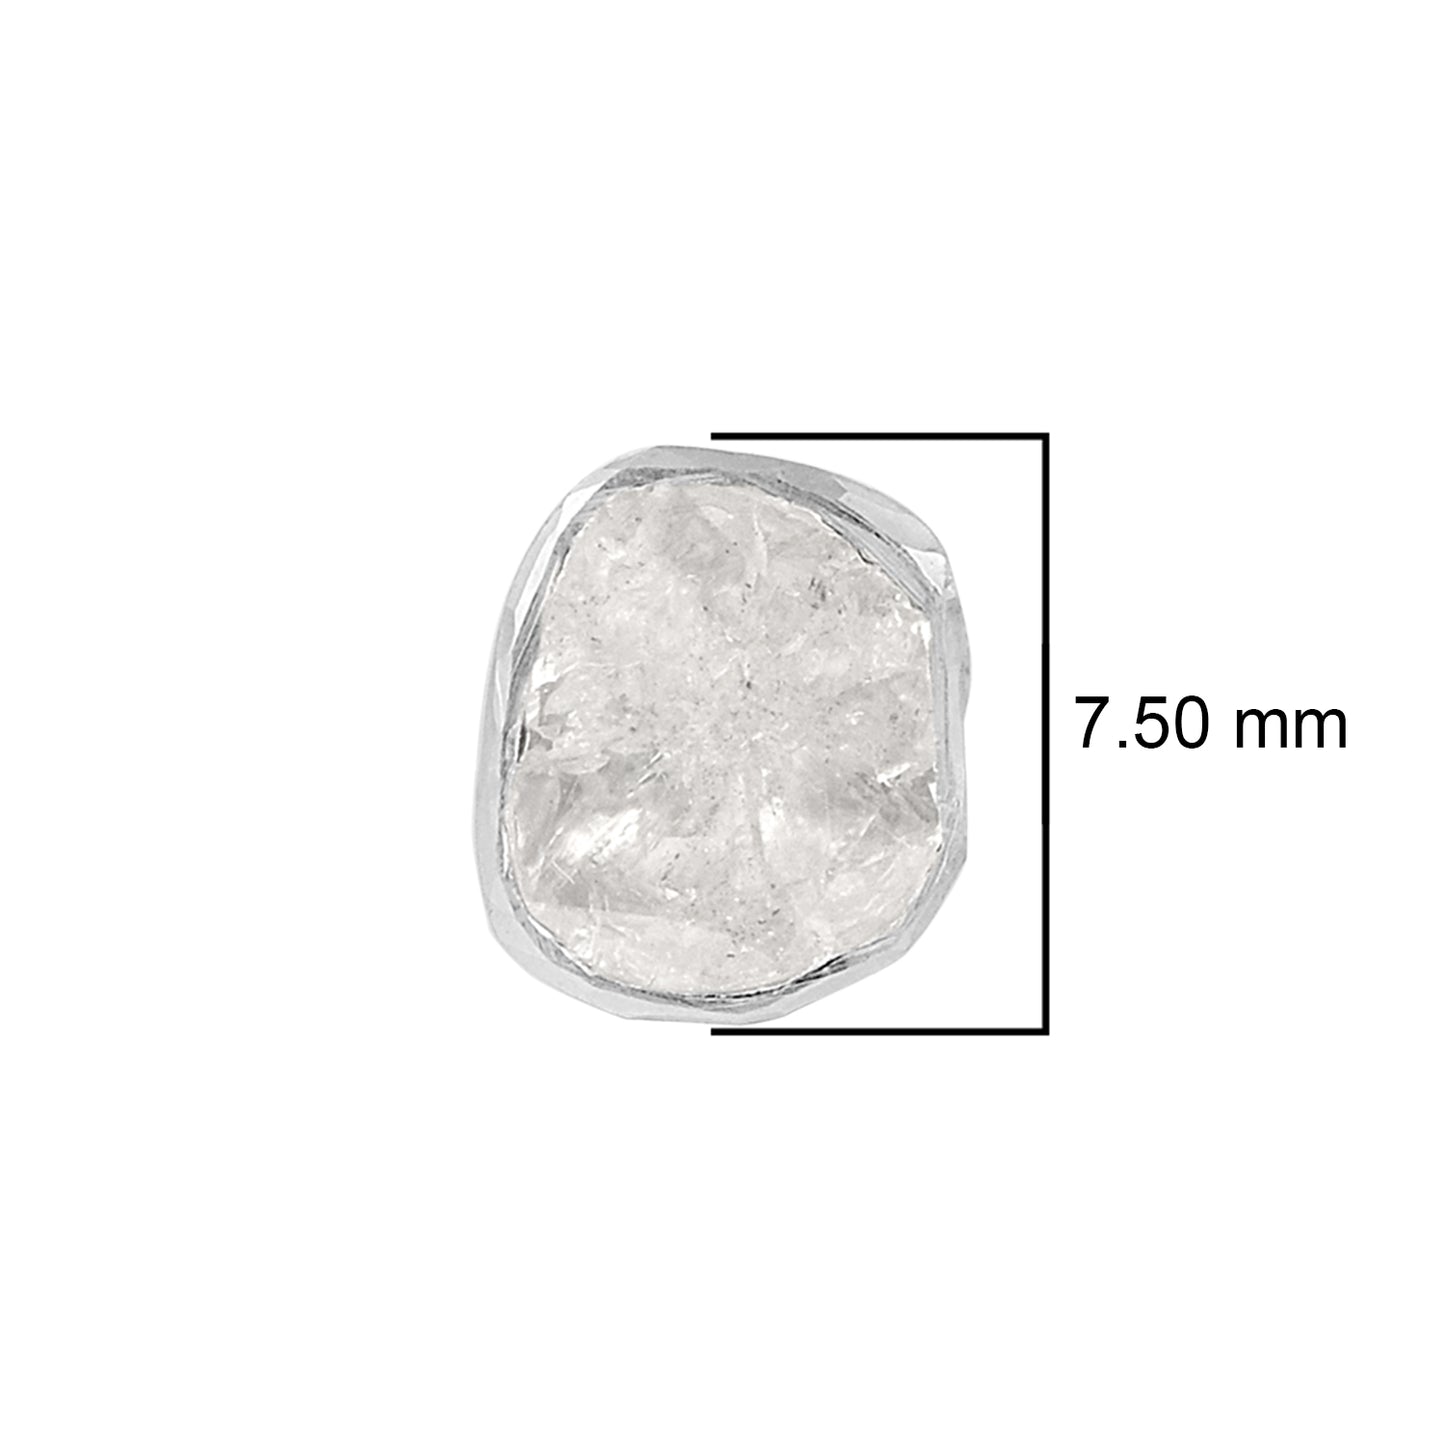 0.50ct  Natural Uncut Polki Diamond Solitaire Stud Earrings-Timeless Radiance